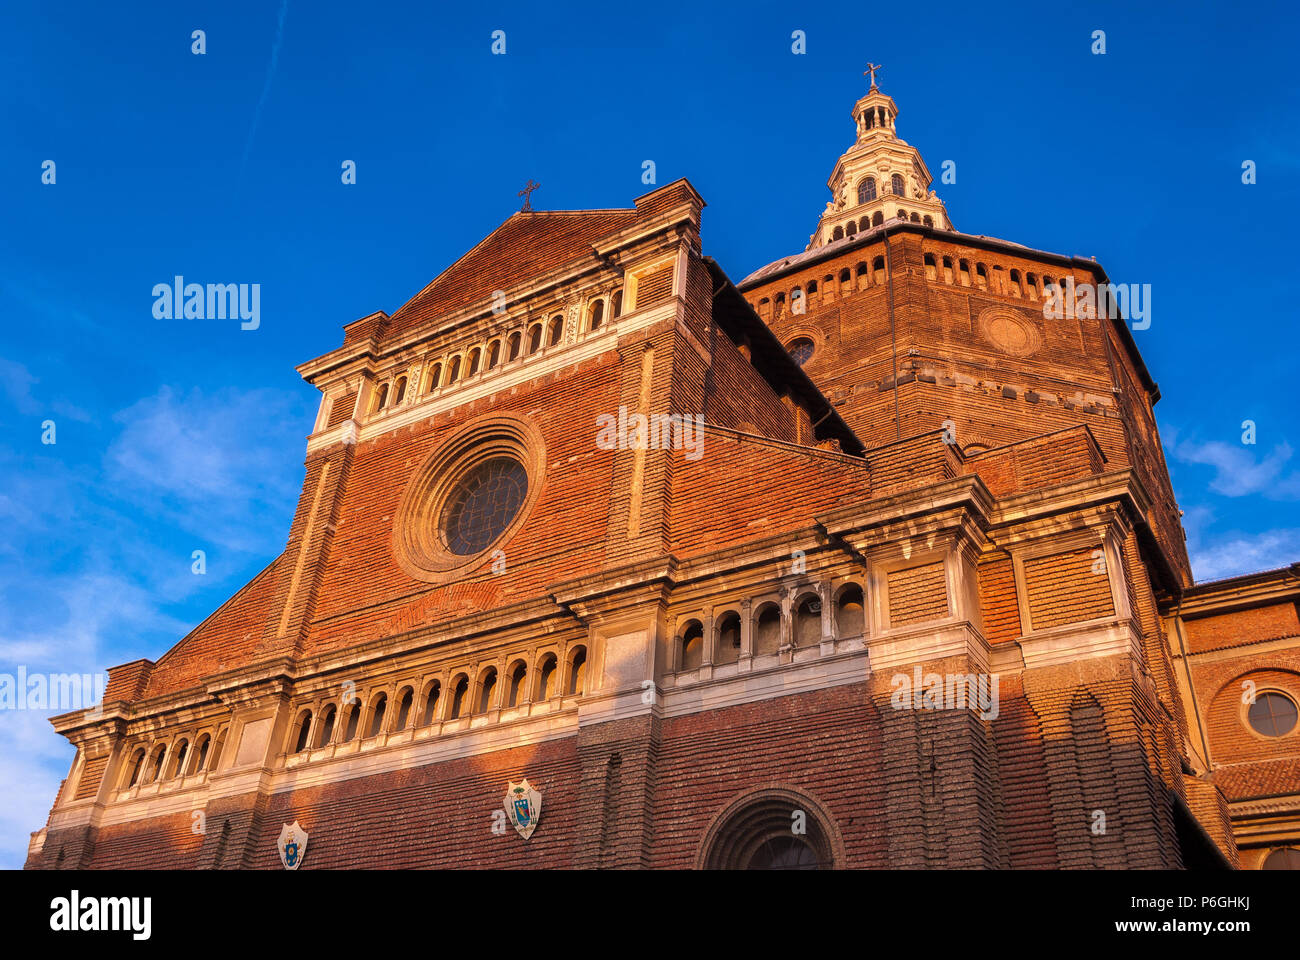 The cathedral of Pavia (Lombardy, Italy) Stock Photo